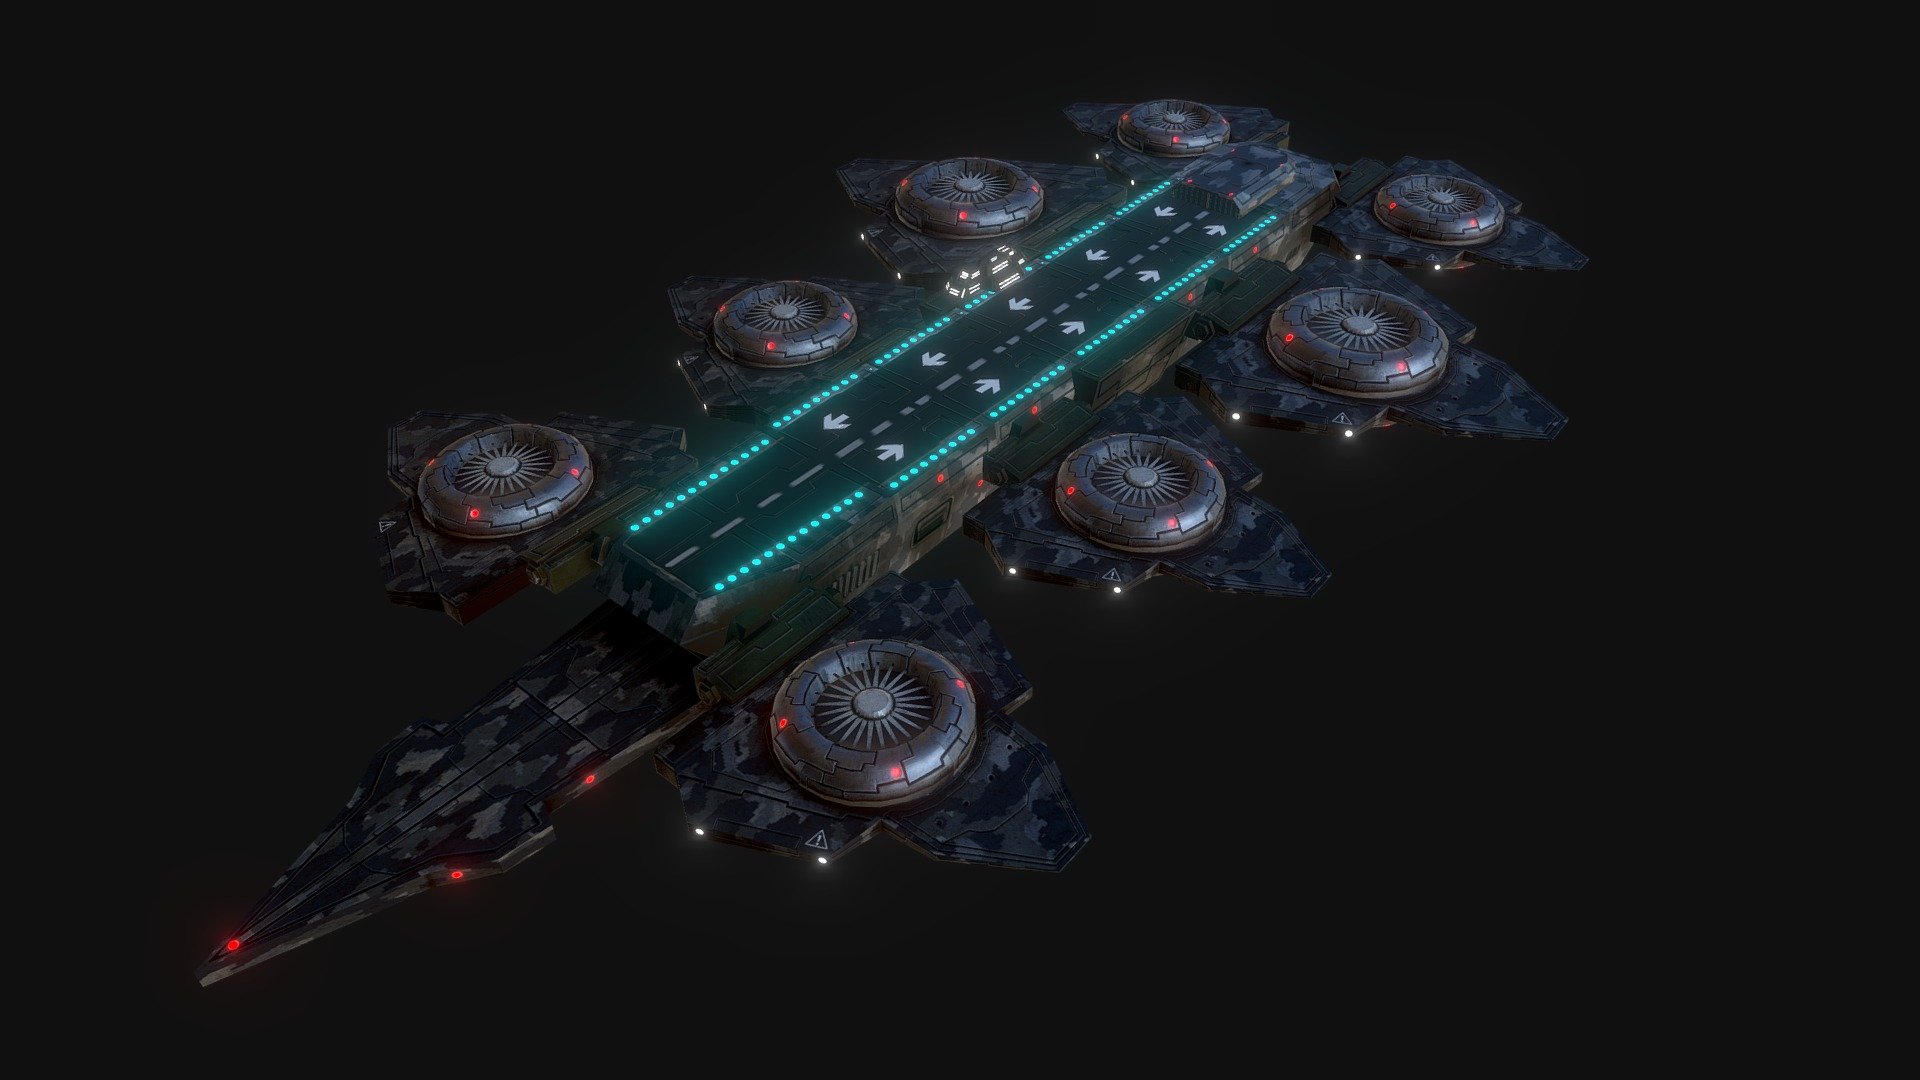 Designed for use in video games this sky cruiser serves as a battle command station as well as an assault mothership.

Download for free 3d model